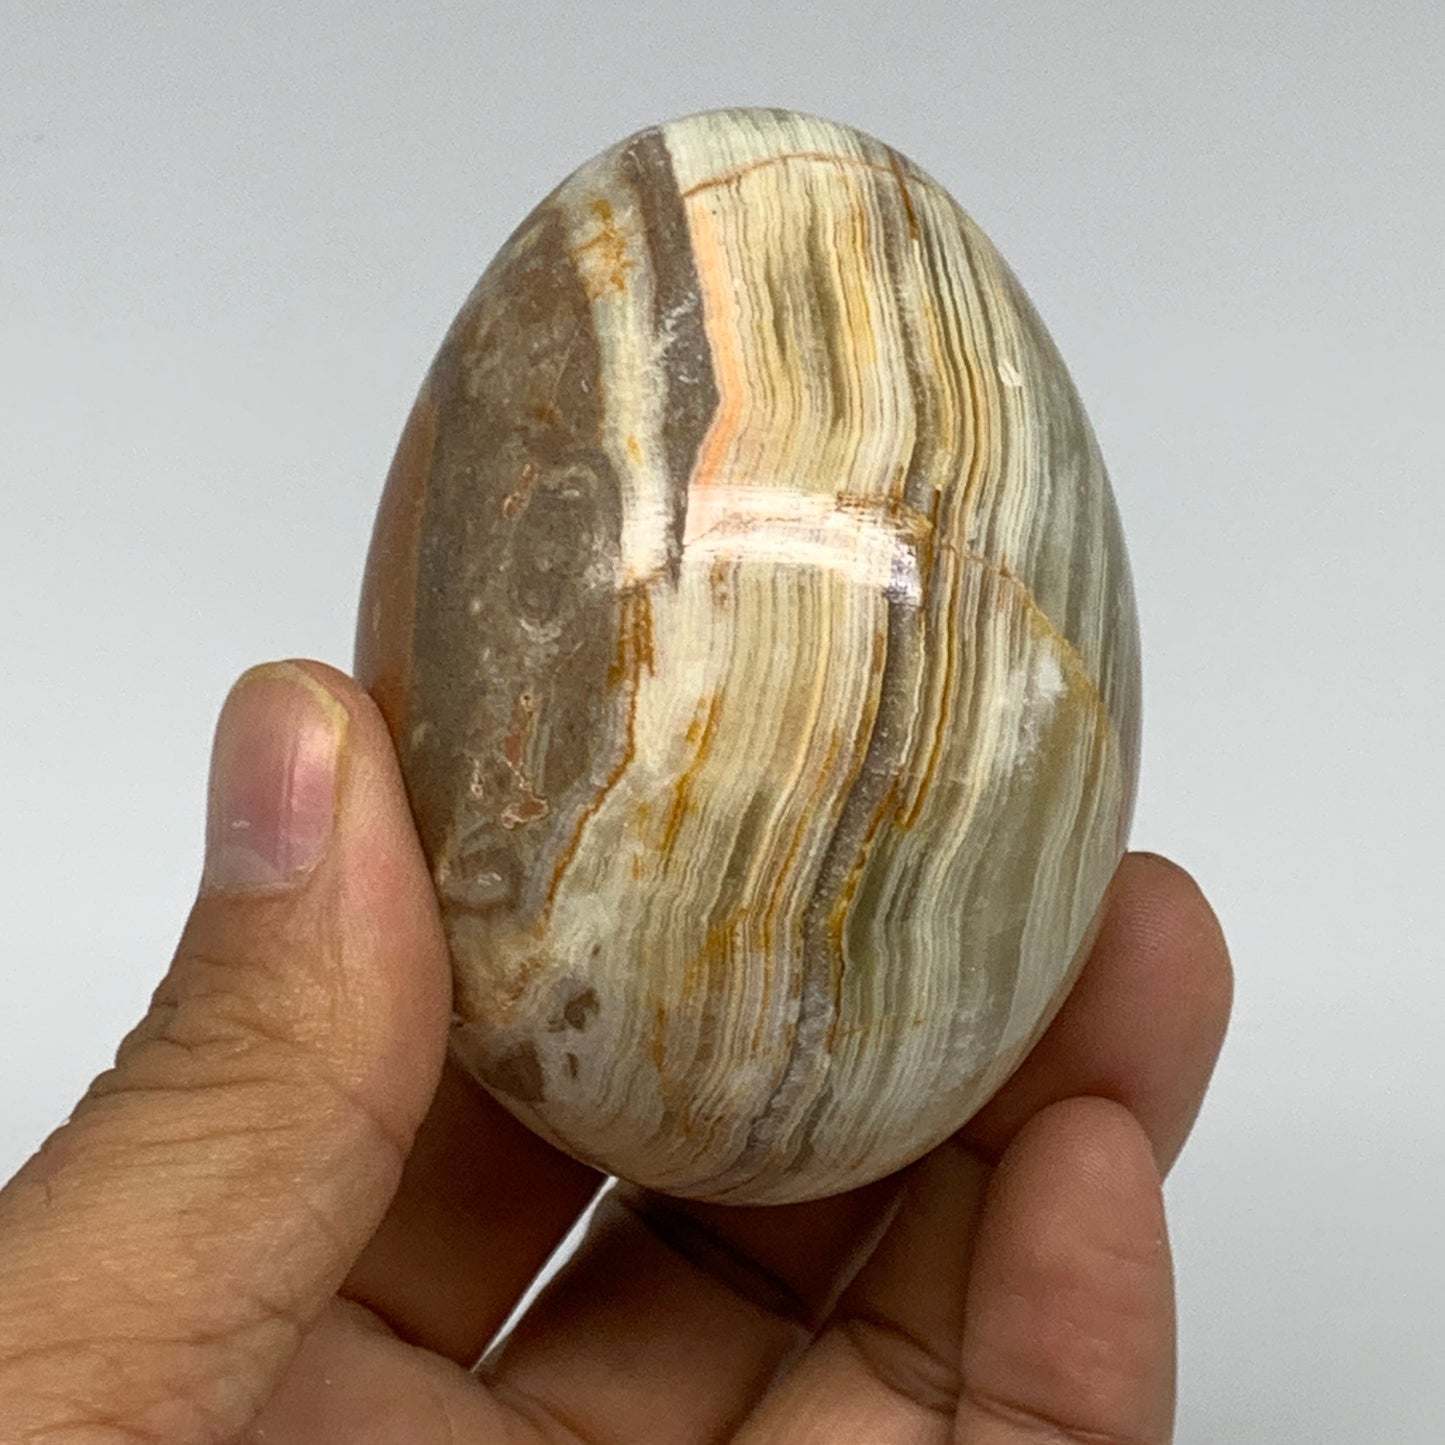 258g, 2.7"x2" Natural Green Onyx Egg Gemstone Mineral, from Pakistan, B32046